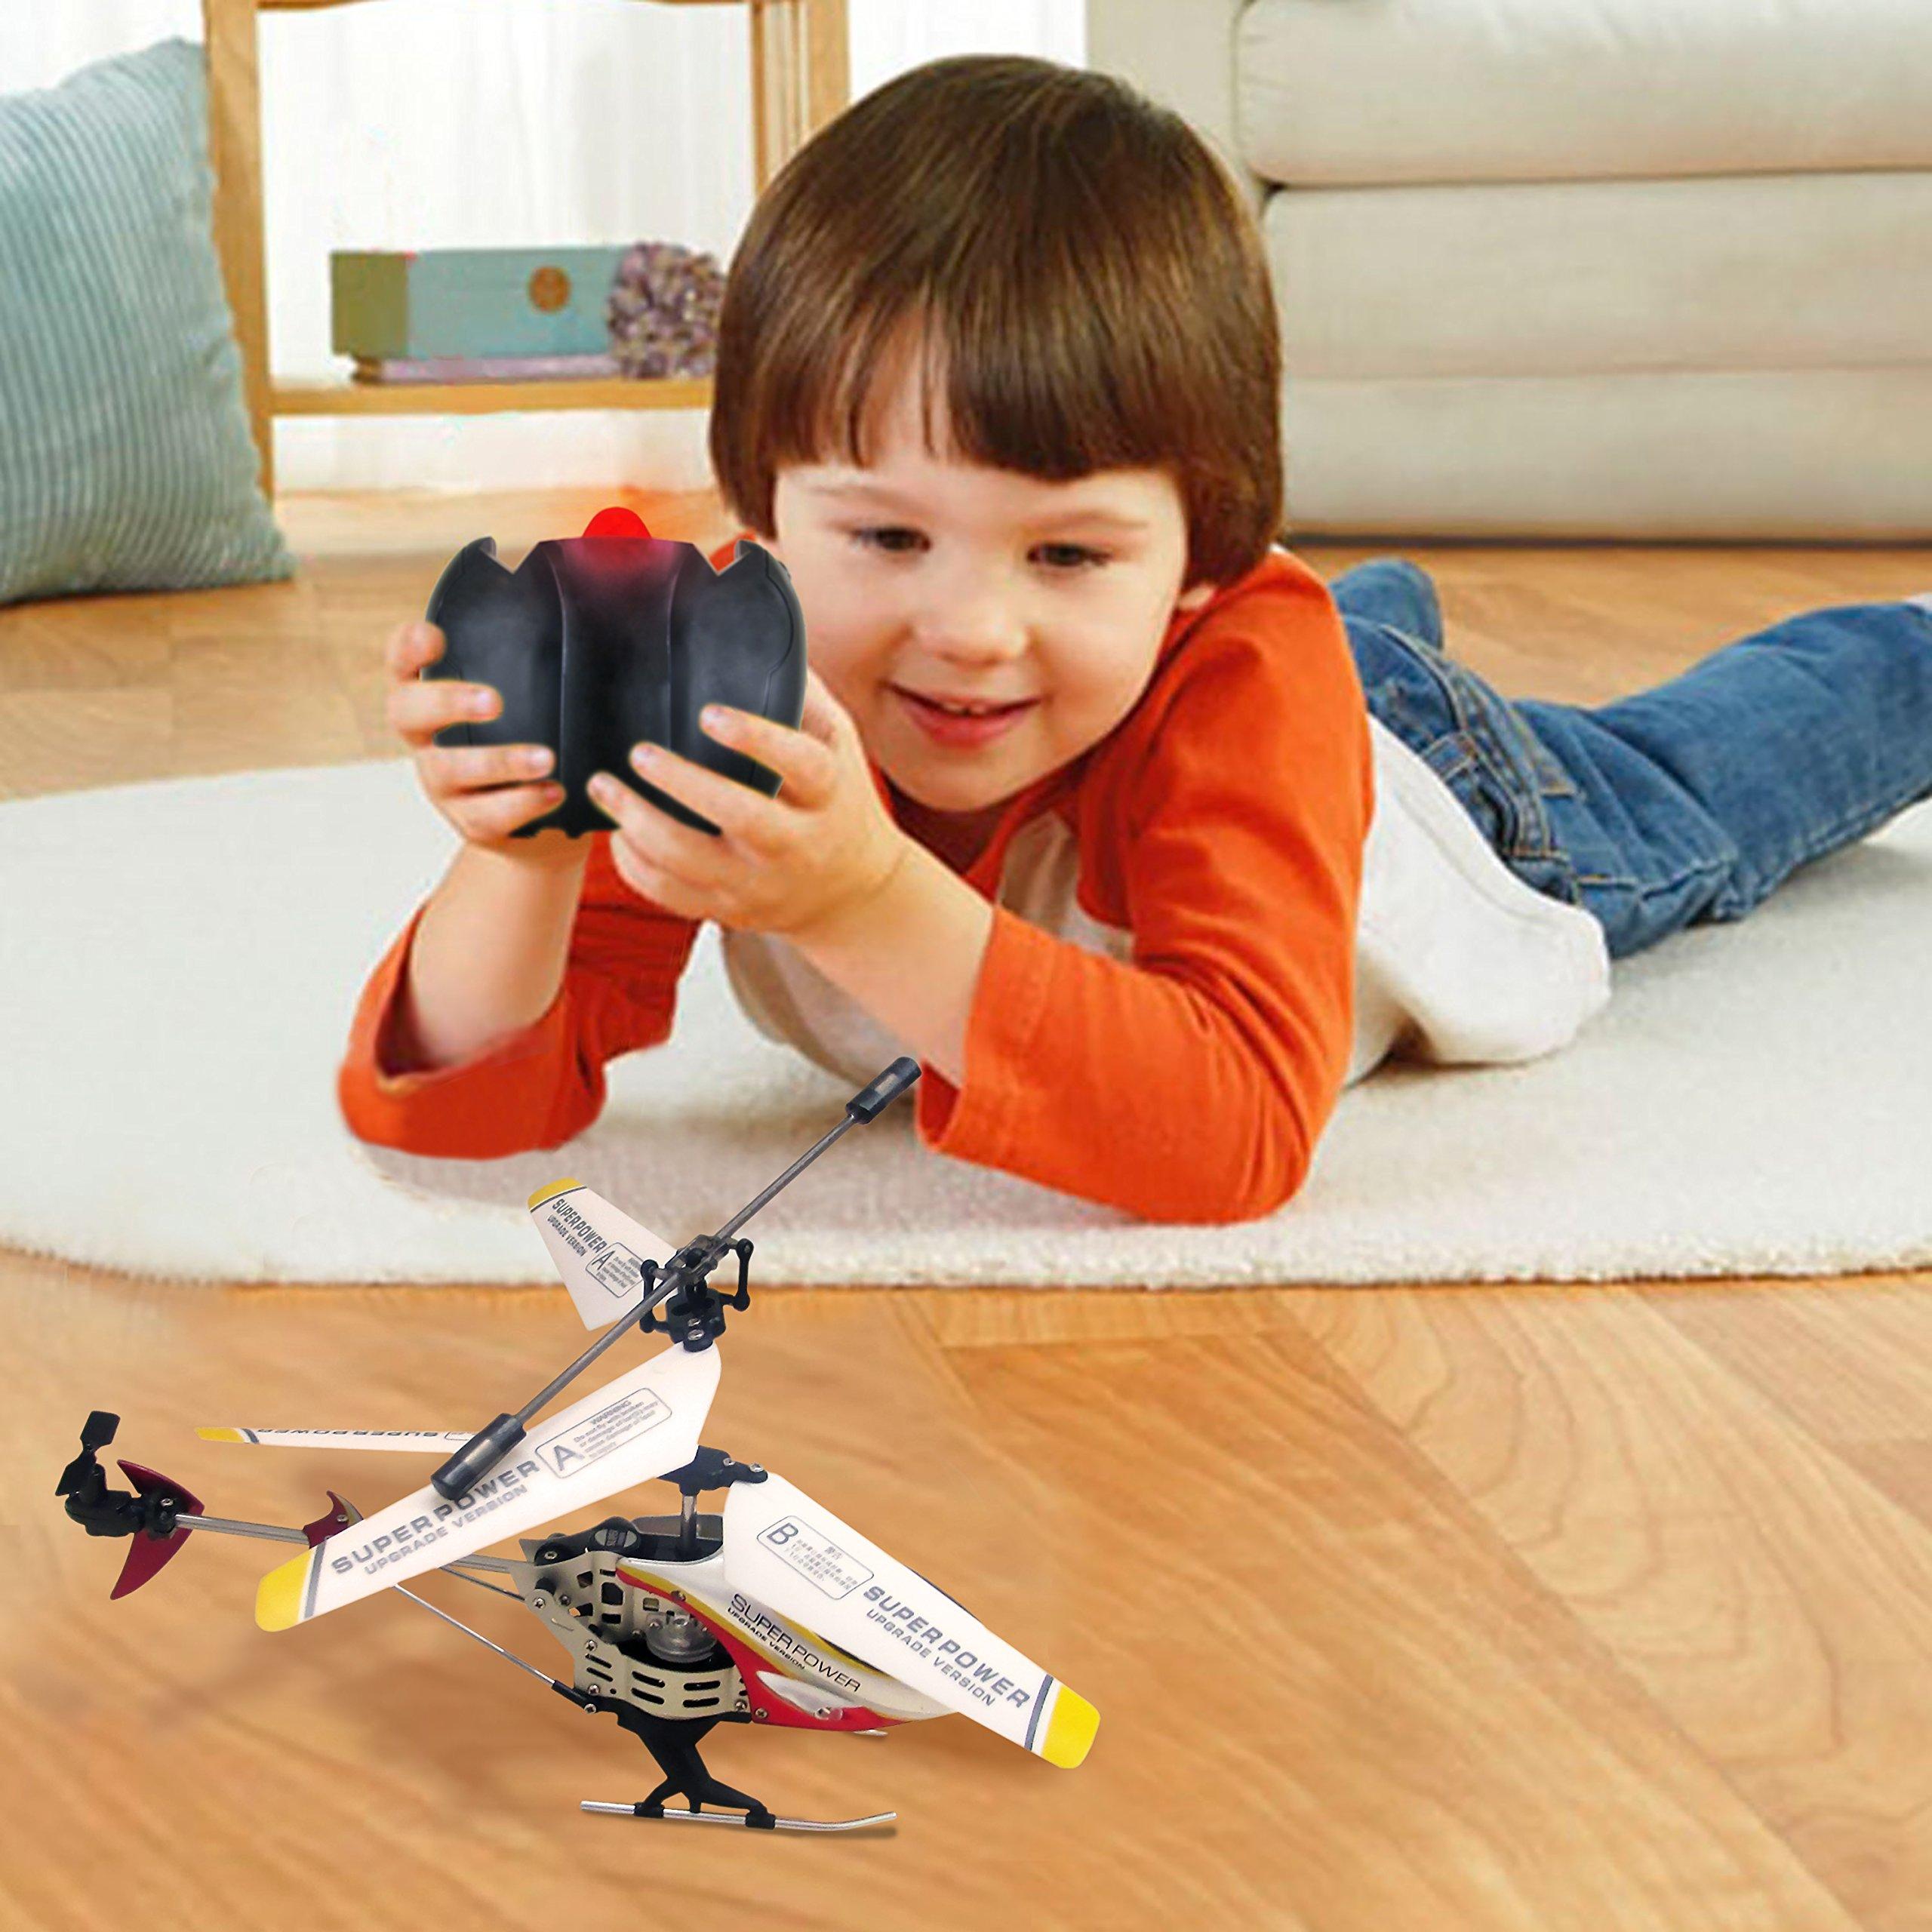 Remote Control Helicopter Rs 100: Enhance and Personalize Your RS 100 with These Upgrades